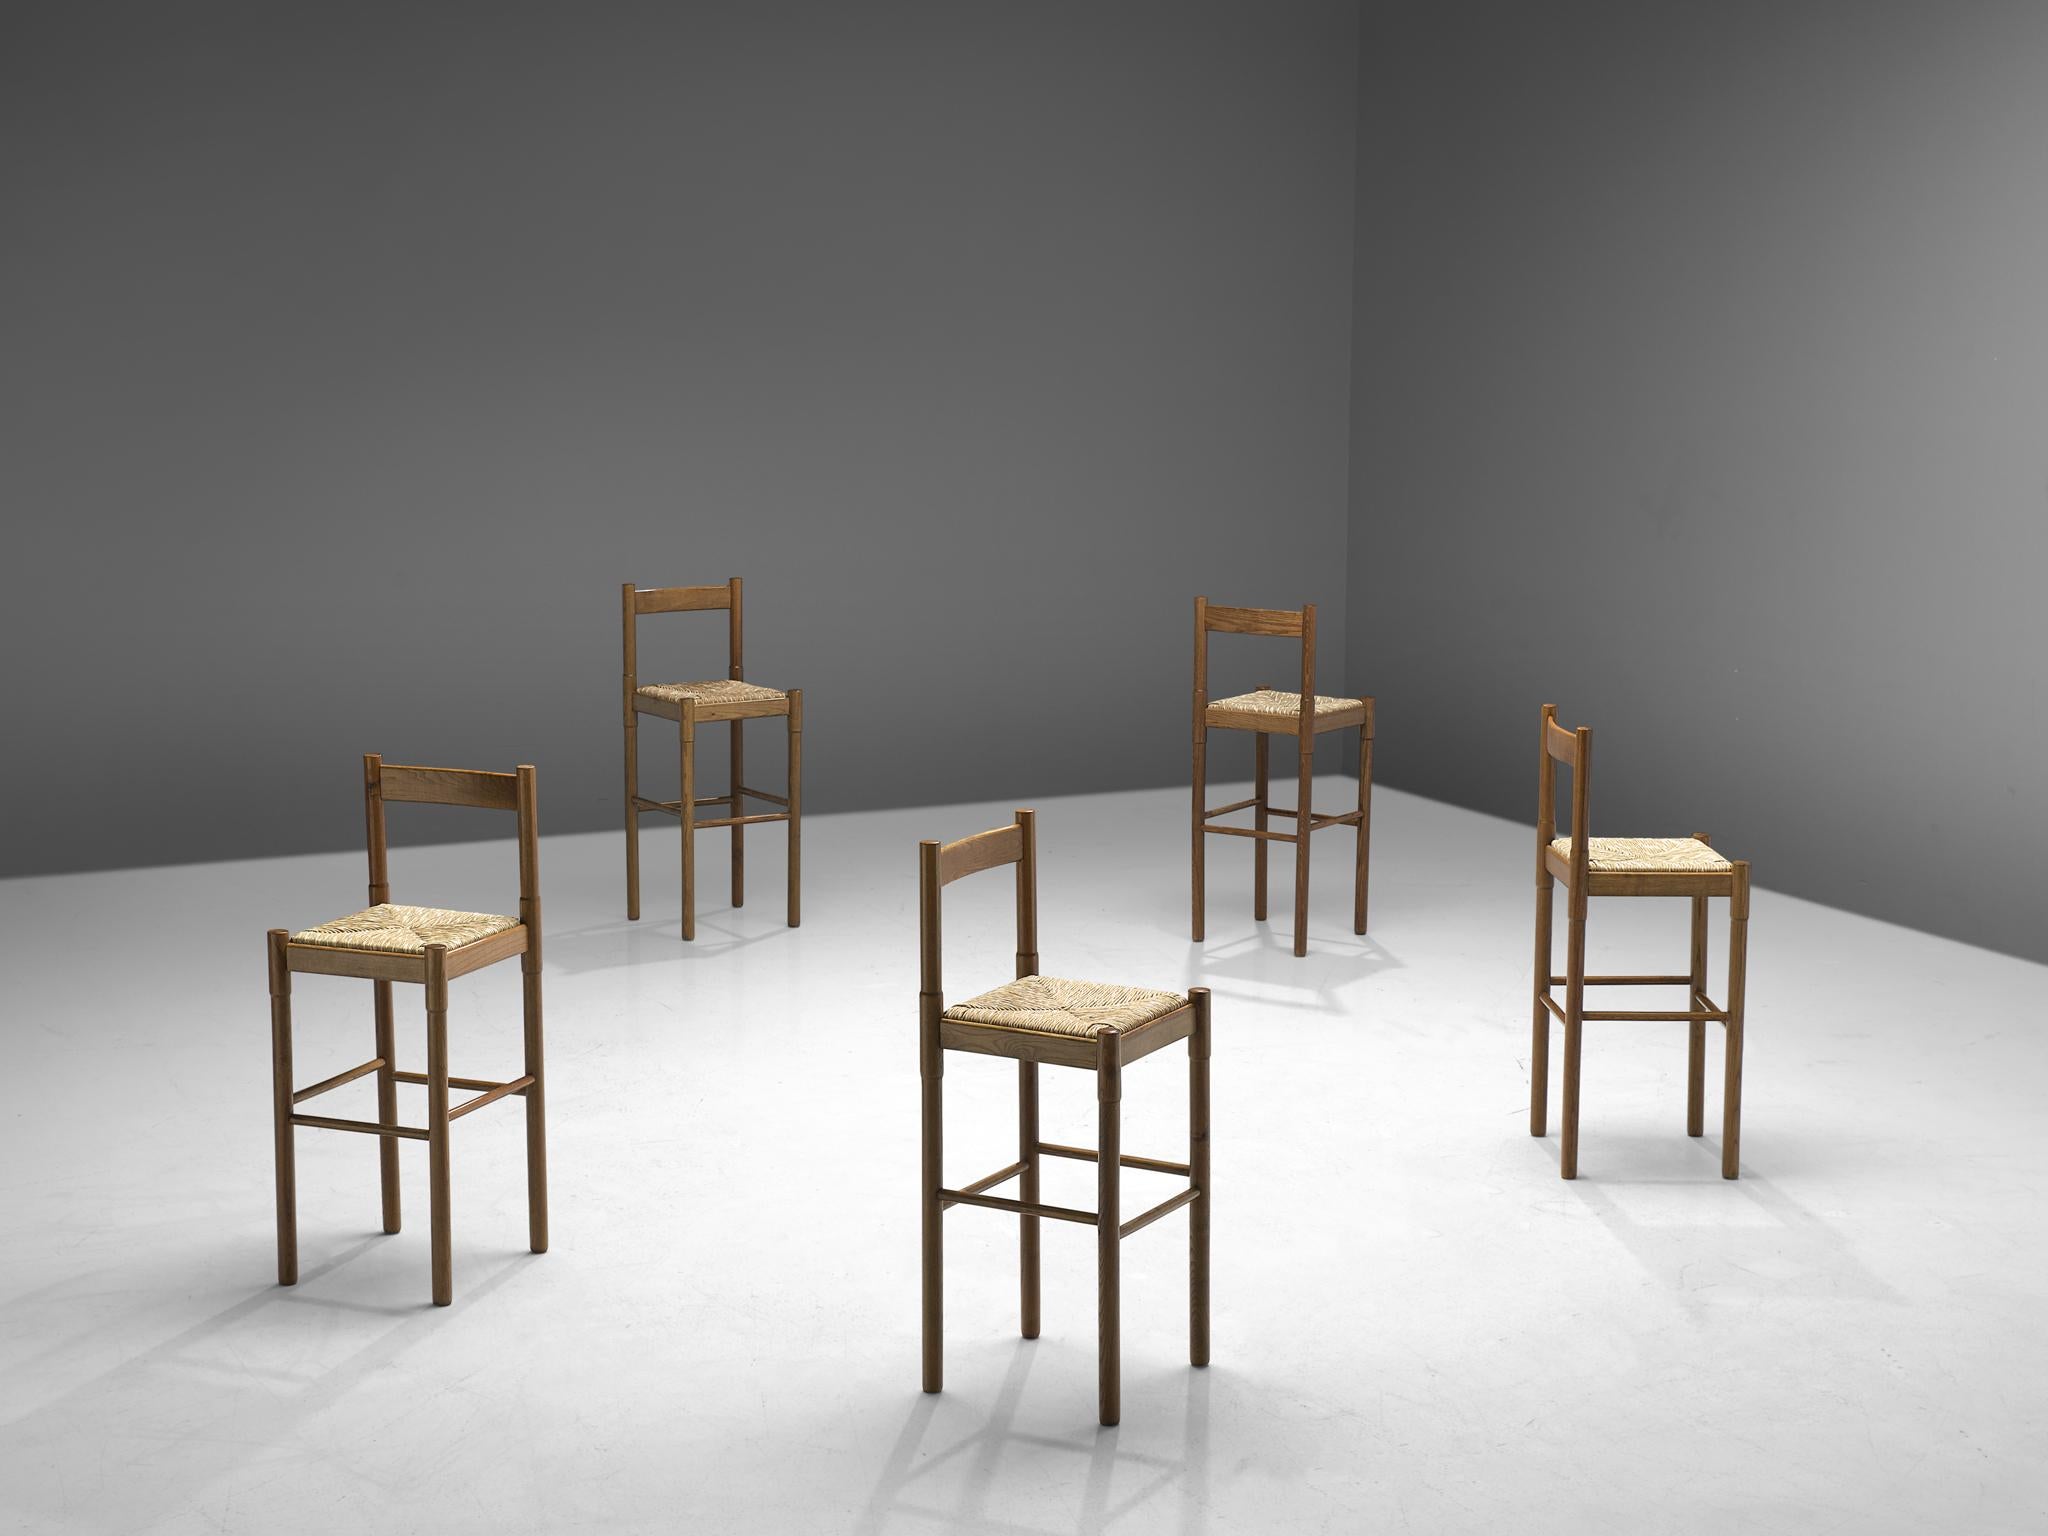 Vico Magistretti, set of 5 barstools, cane and oak, Italy, 1960s

Italian set of five barstools by Vico Magistretti. The stools feature a simplistic, modest design. The frame is made of oak and features straight lines with bold details. The seat